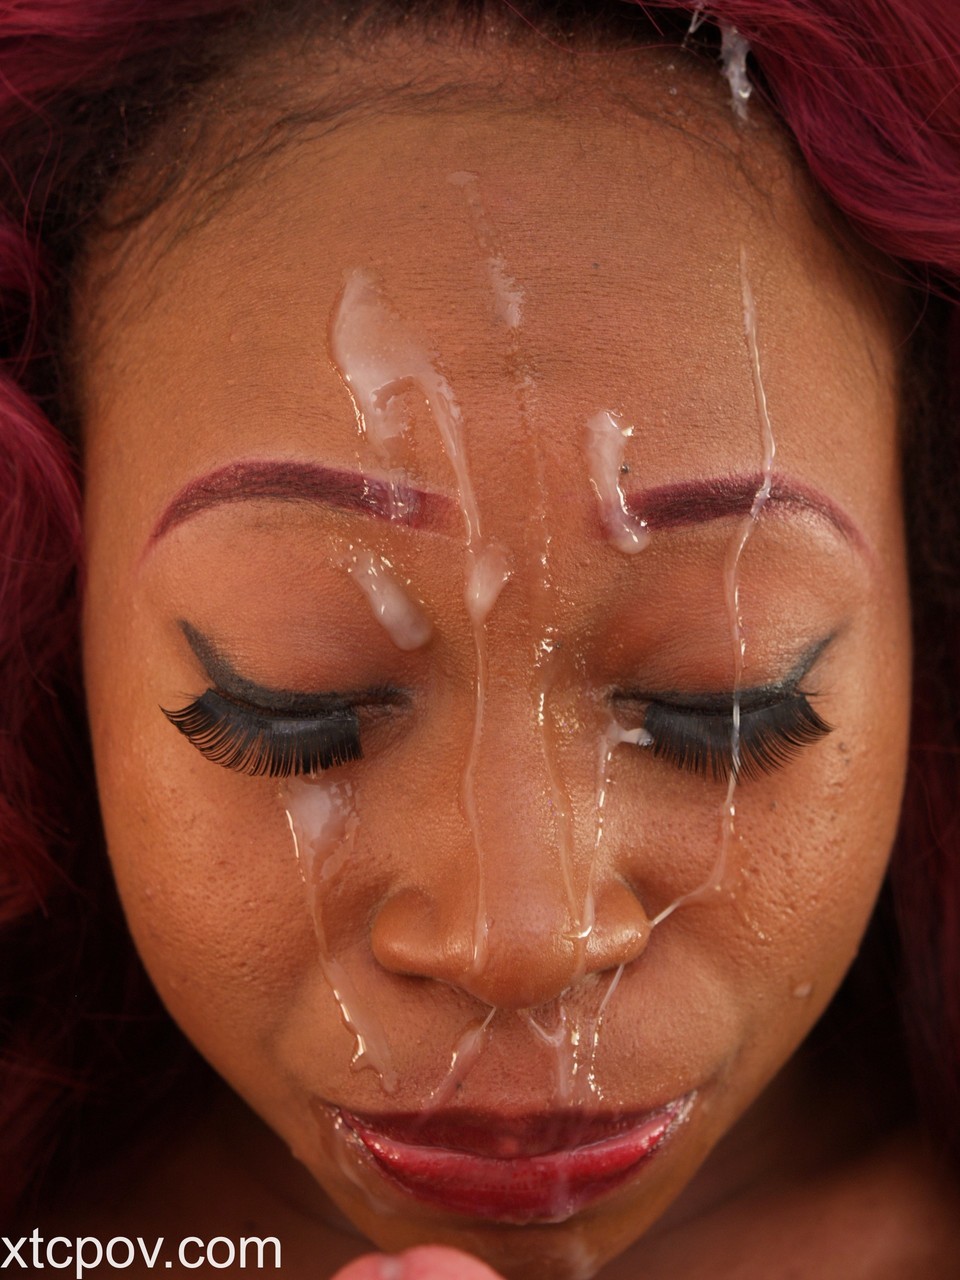 Curly haired redheaded ebony gets her face covered with jizz after a blowjob porno fotoğrafı #423715163 | XTC Pow Pics, Mocha Menage, Facial, mobil porno